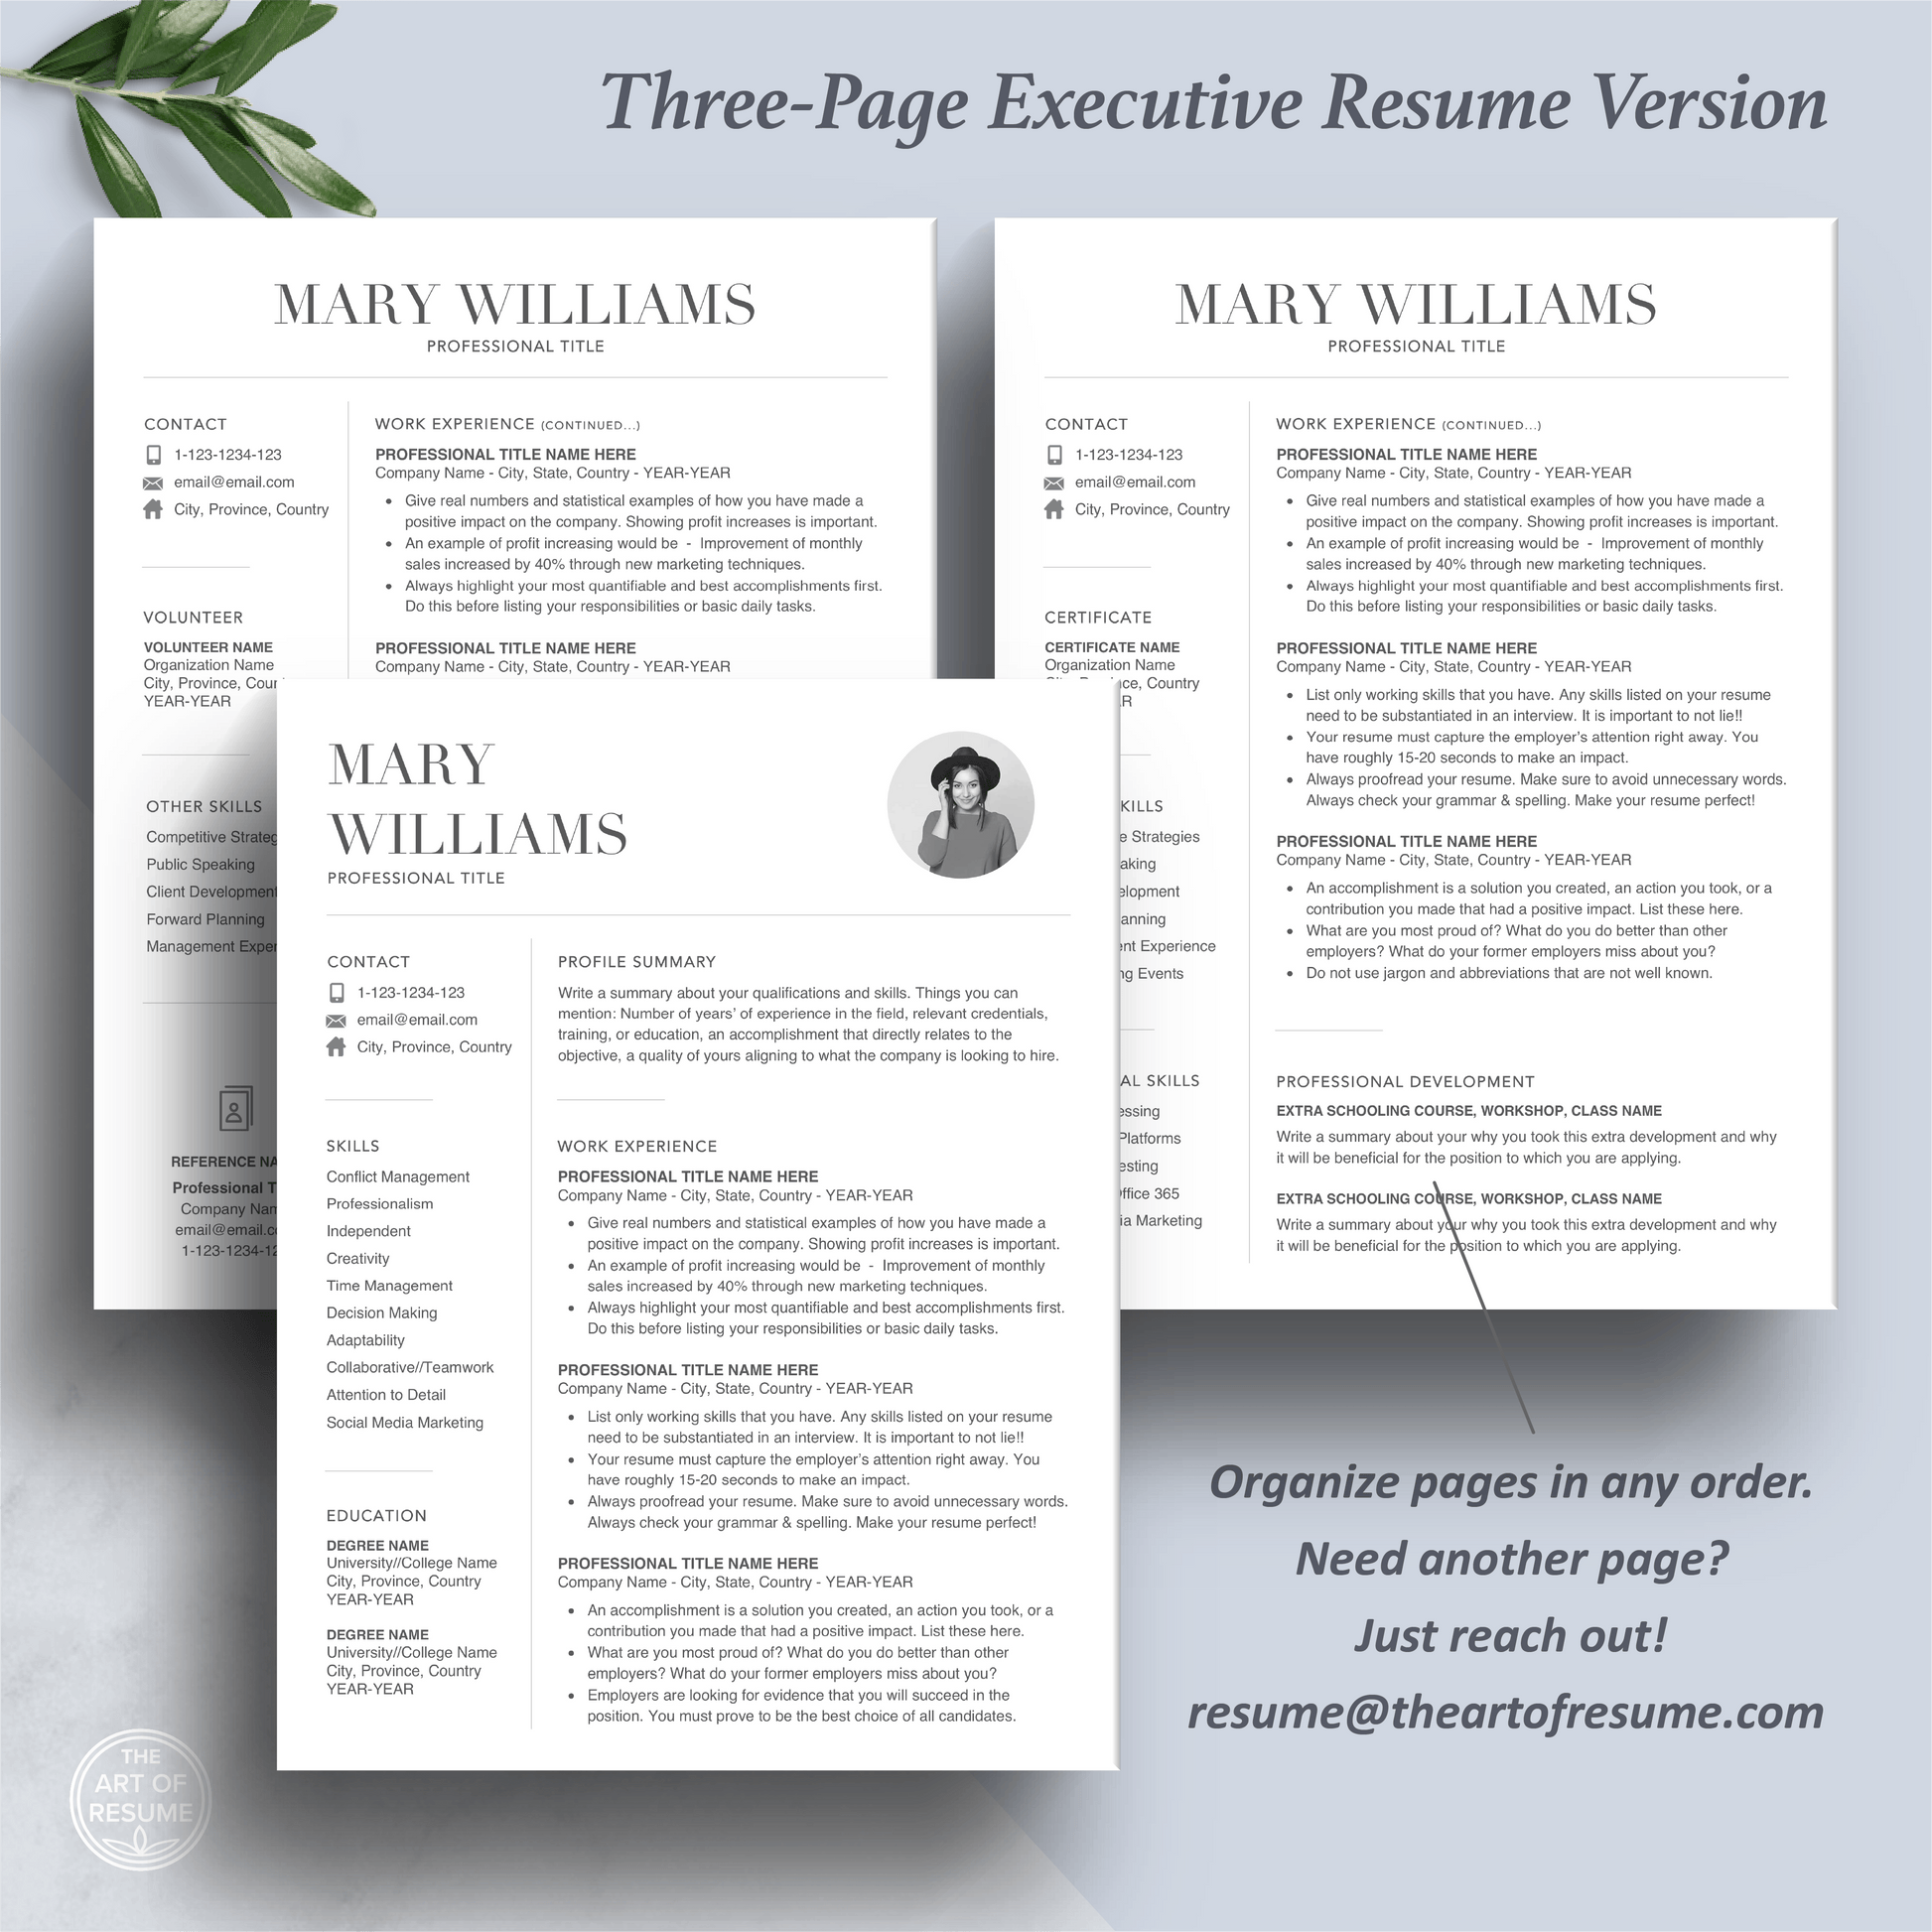 Simple Resume with Photo | Modern Resume Design | Professional Resumes - The Art of Resume